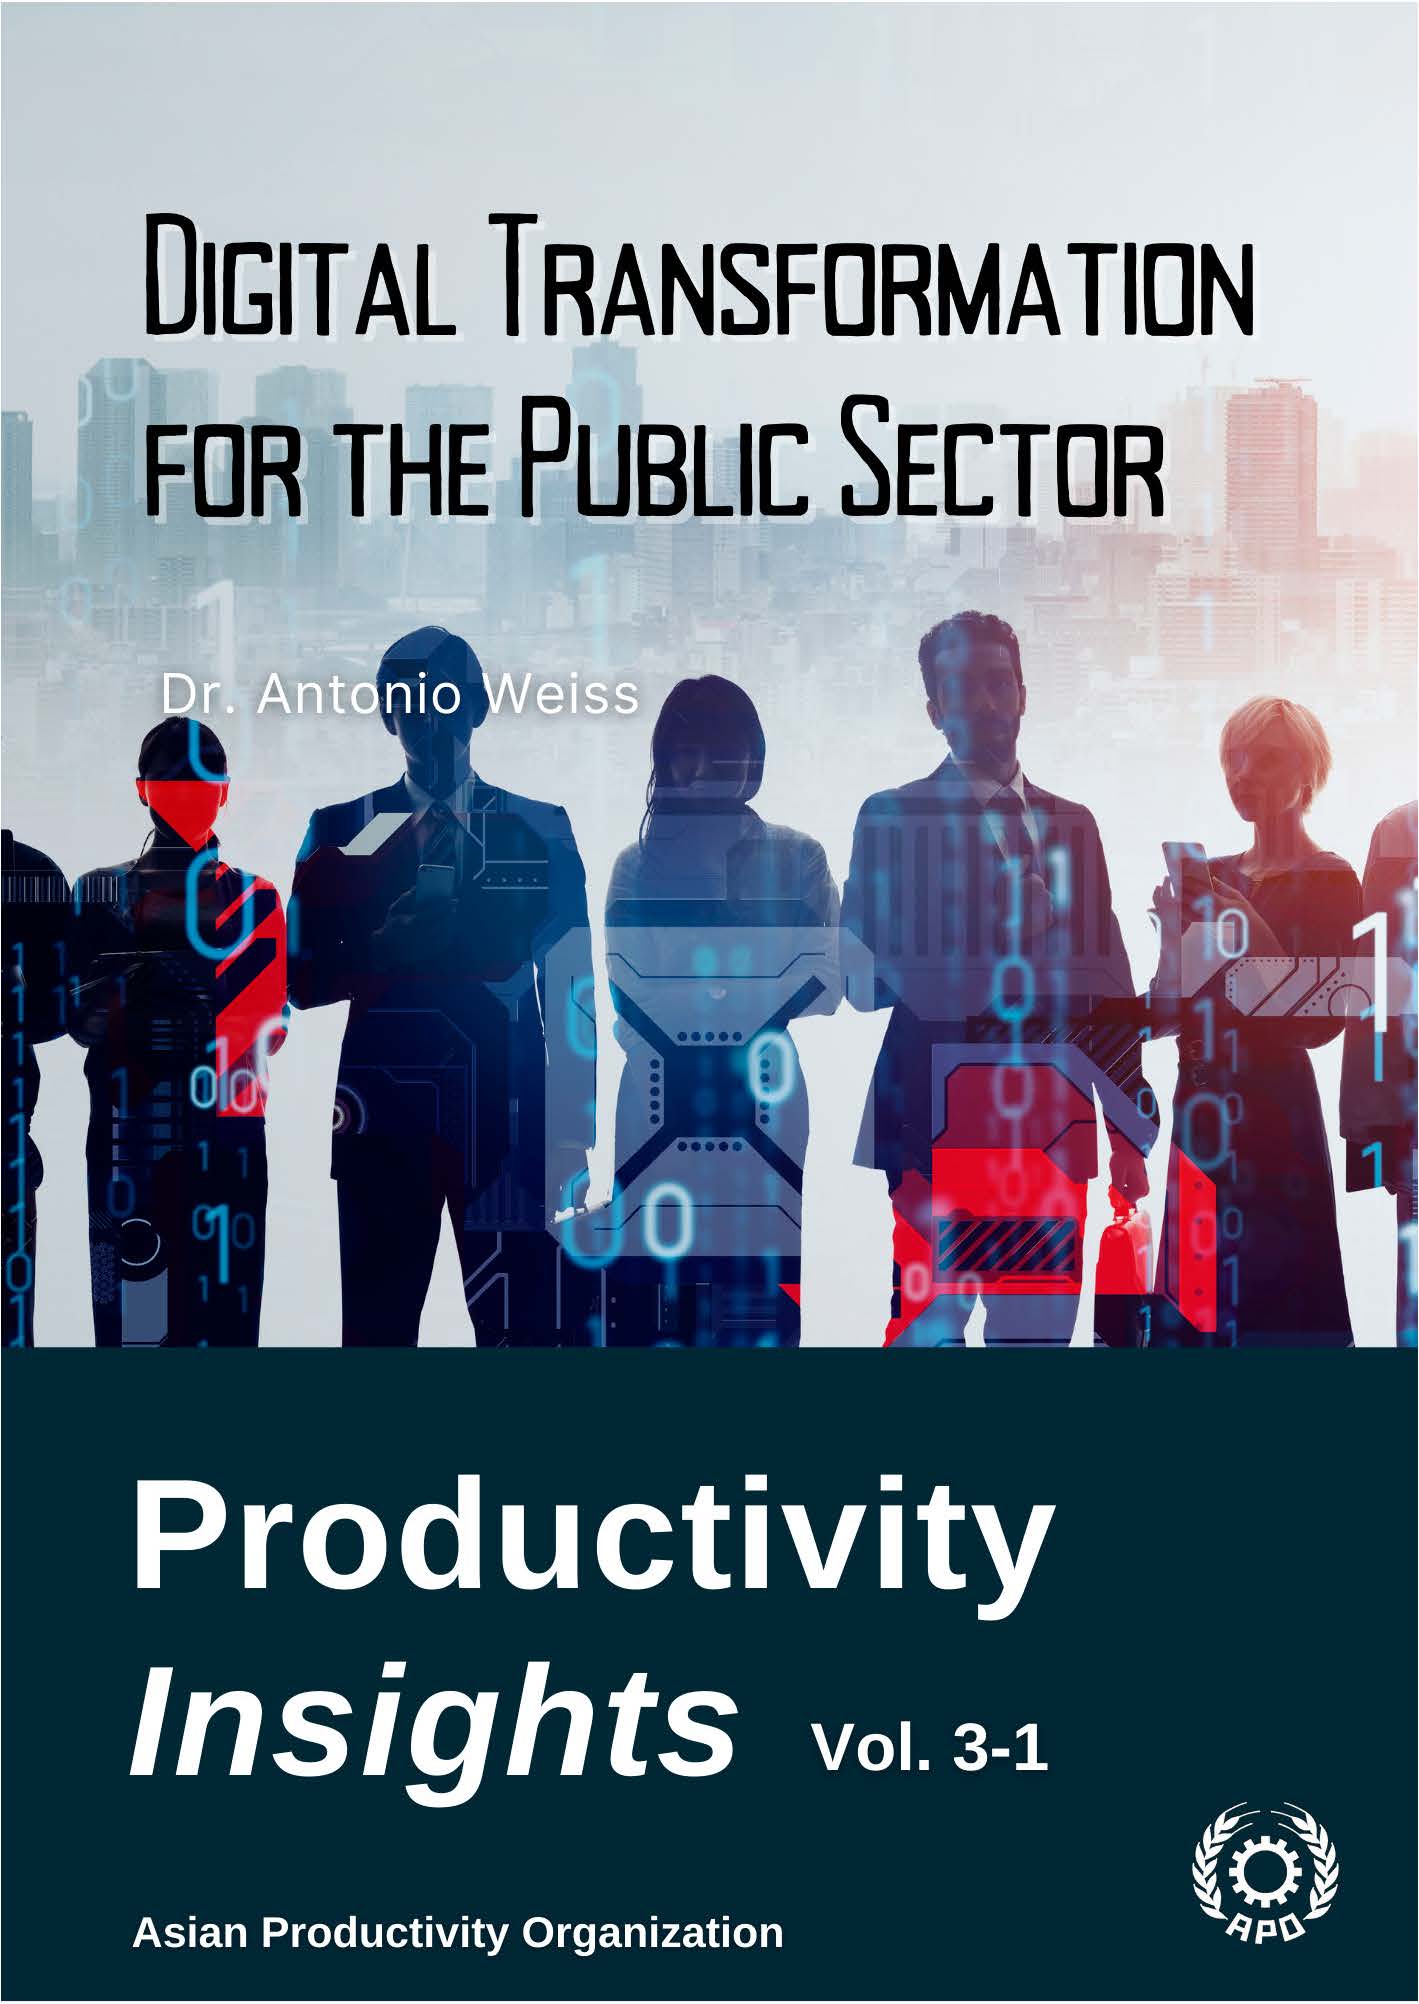 Digital Transformation for the Public Sector